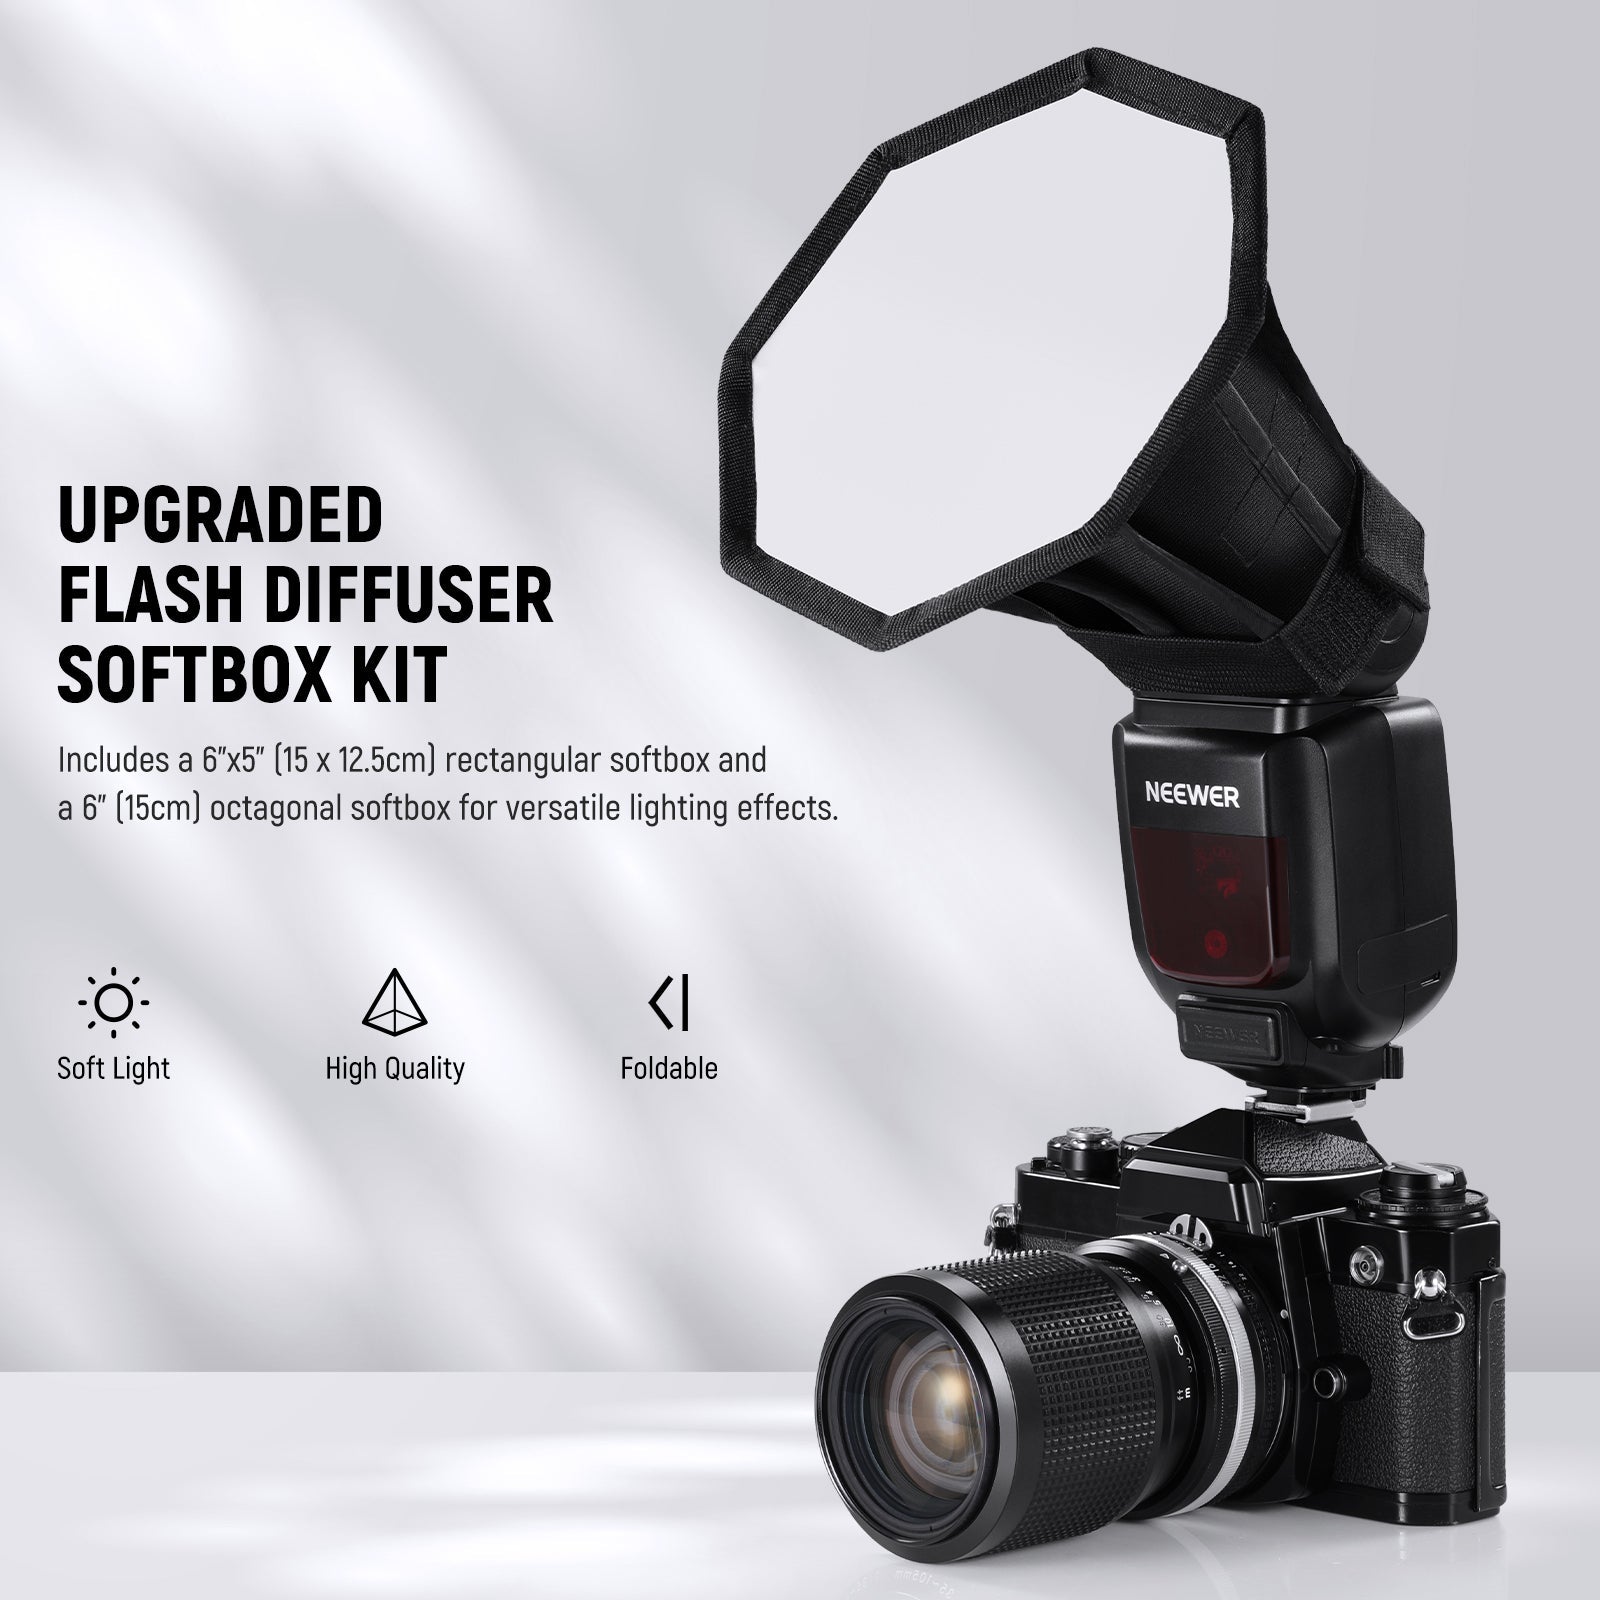 NEEWER NS5P Upgraded Flash Diffuser Softboxes